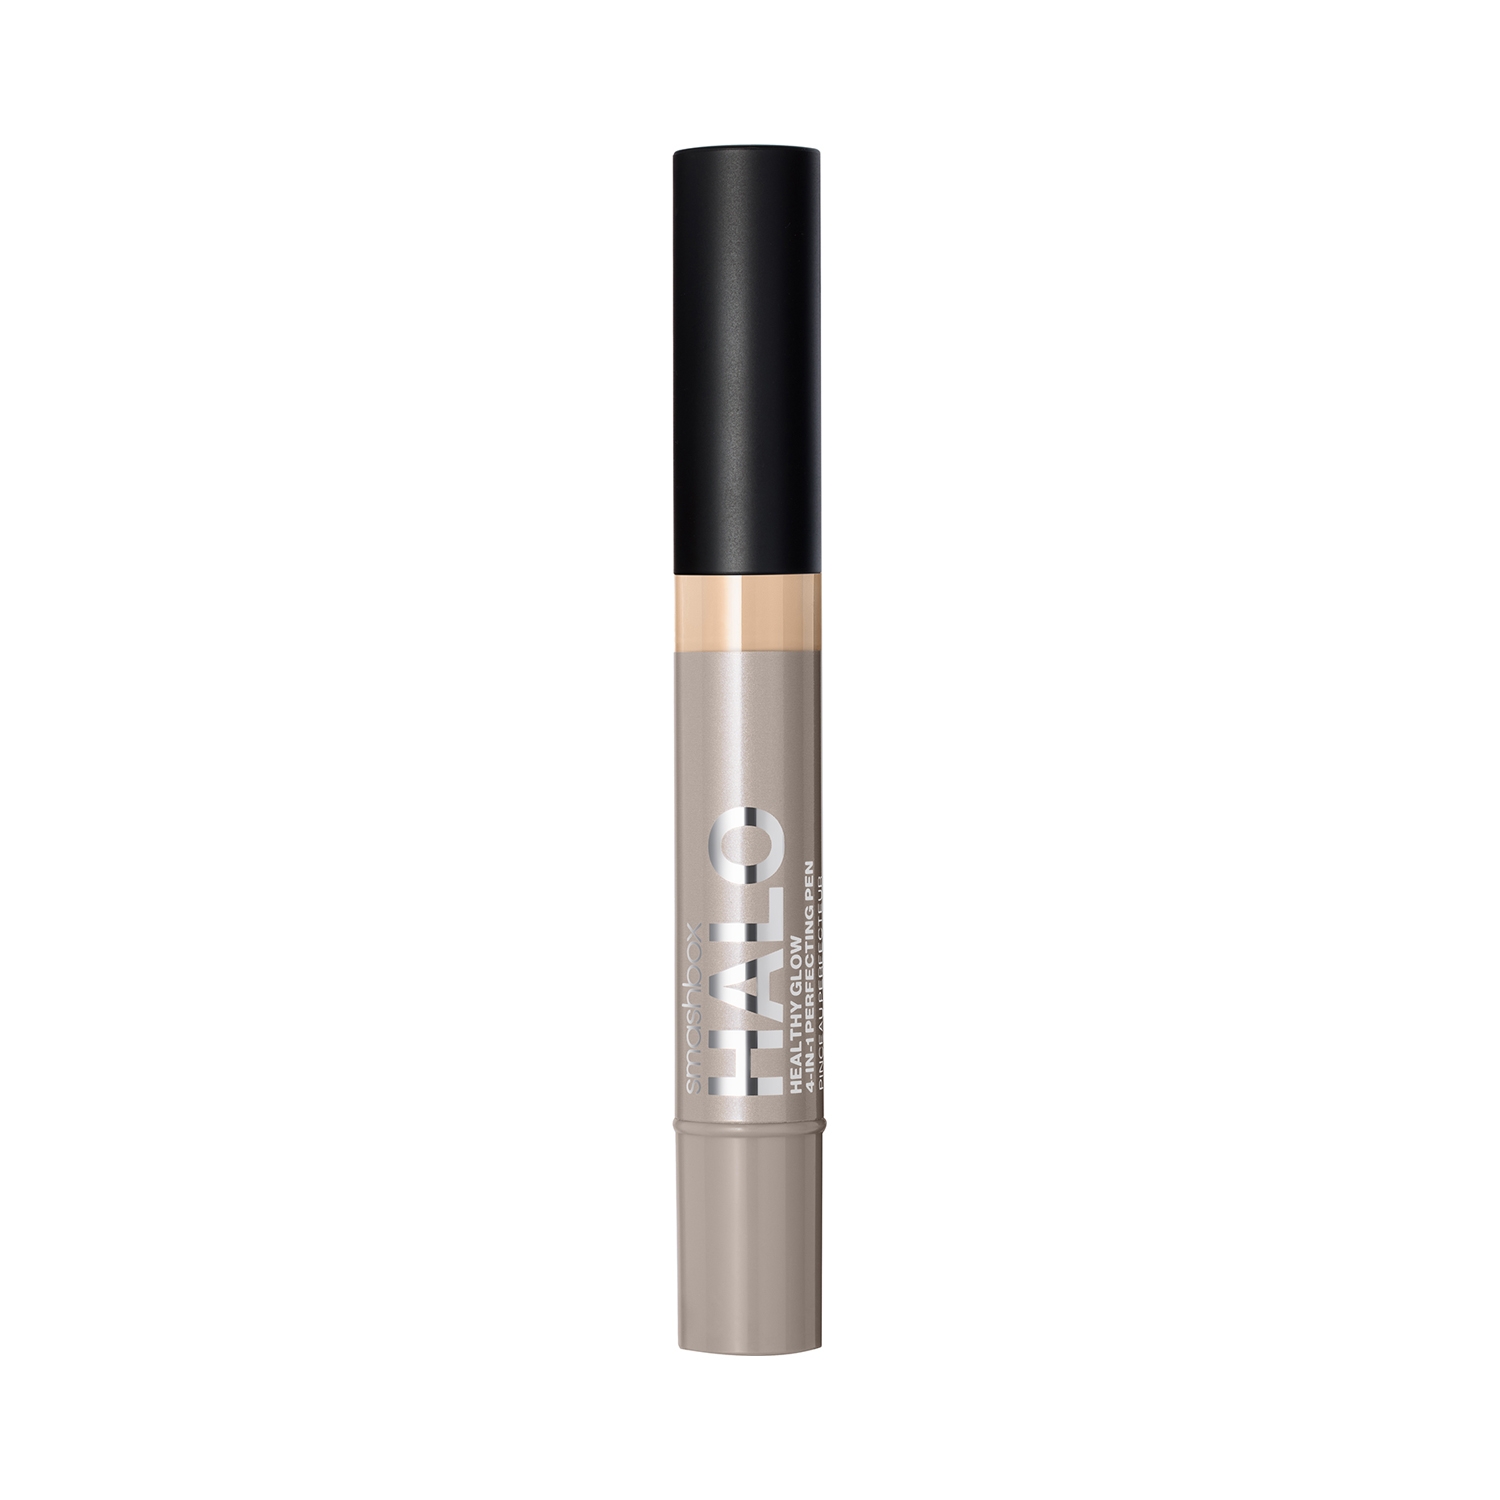 Smashbox | Smashbox Halo Healthy Glow 4-In-1 Perfecting Concealer Pen - F30N (3.5ml)